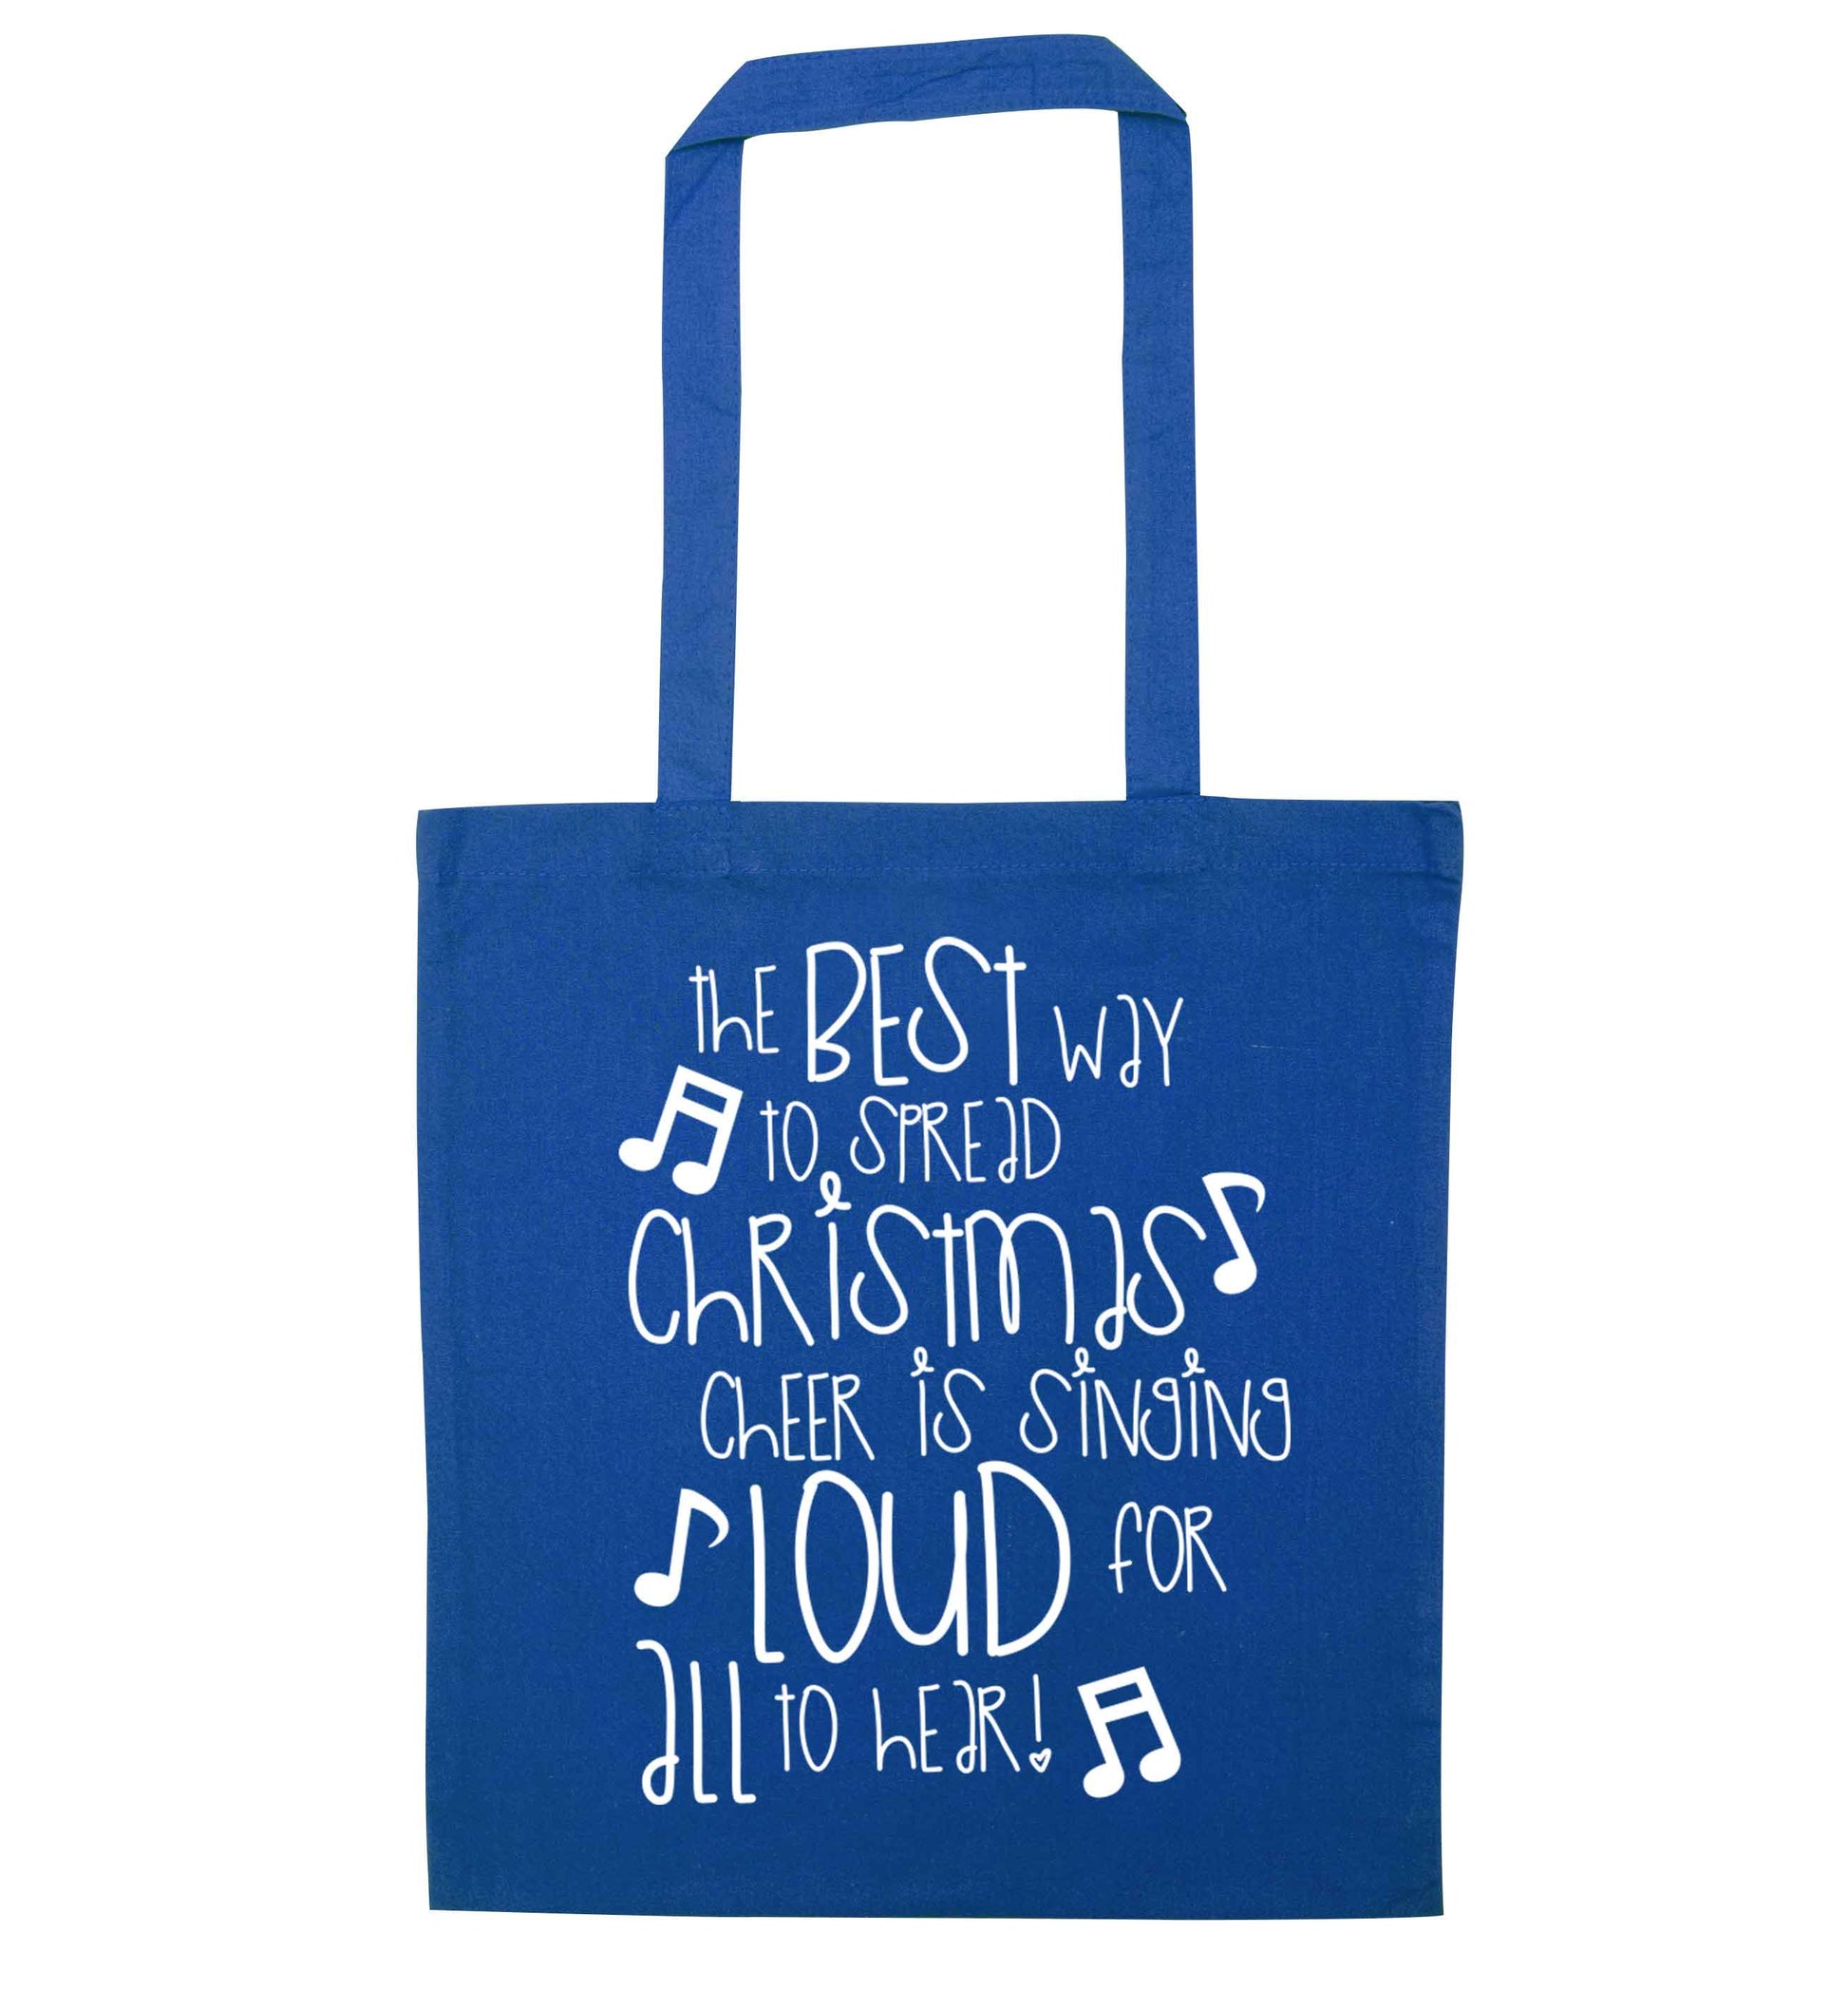 The best way to spread Christmas cheer is singing loud for all to hear blue tote bag